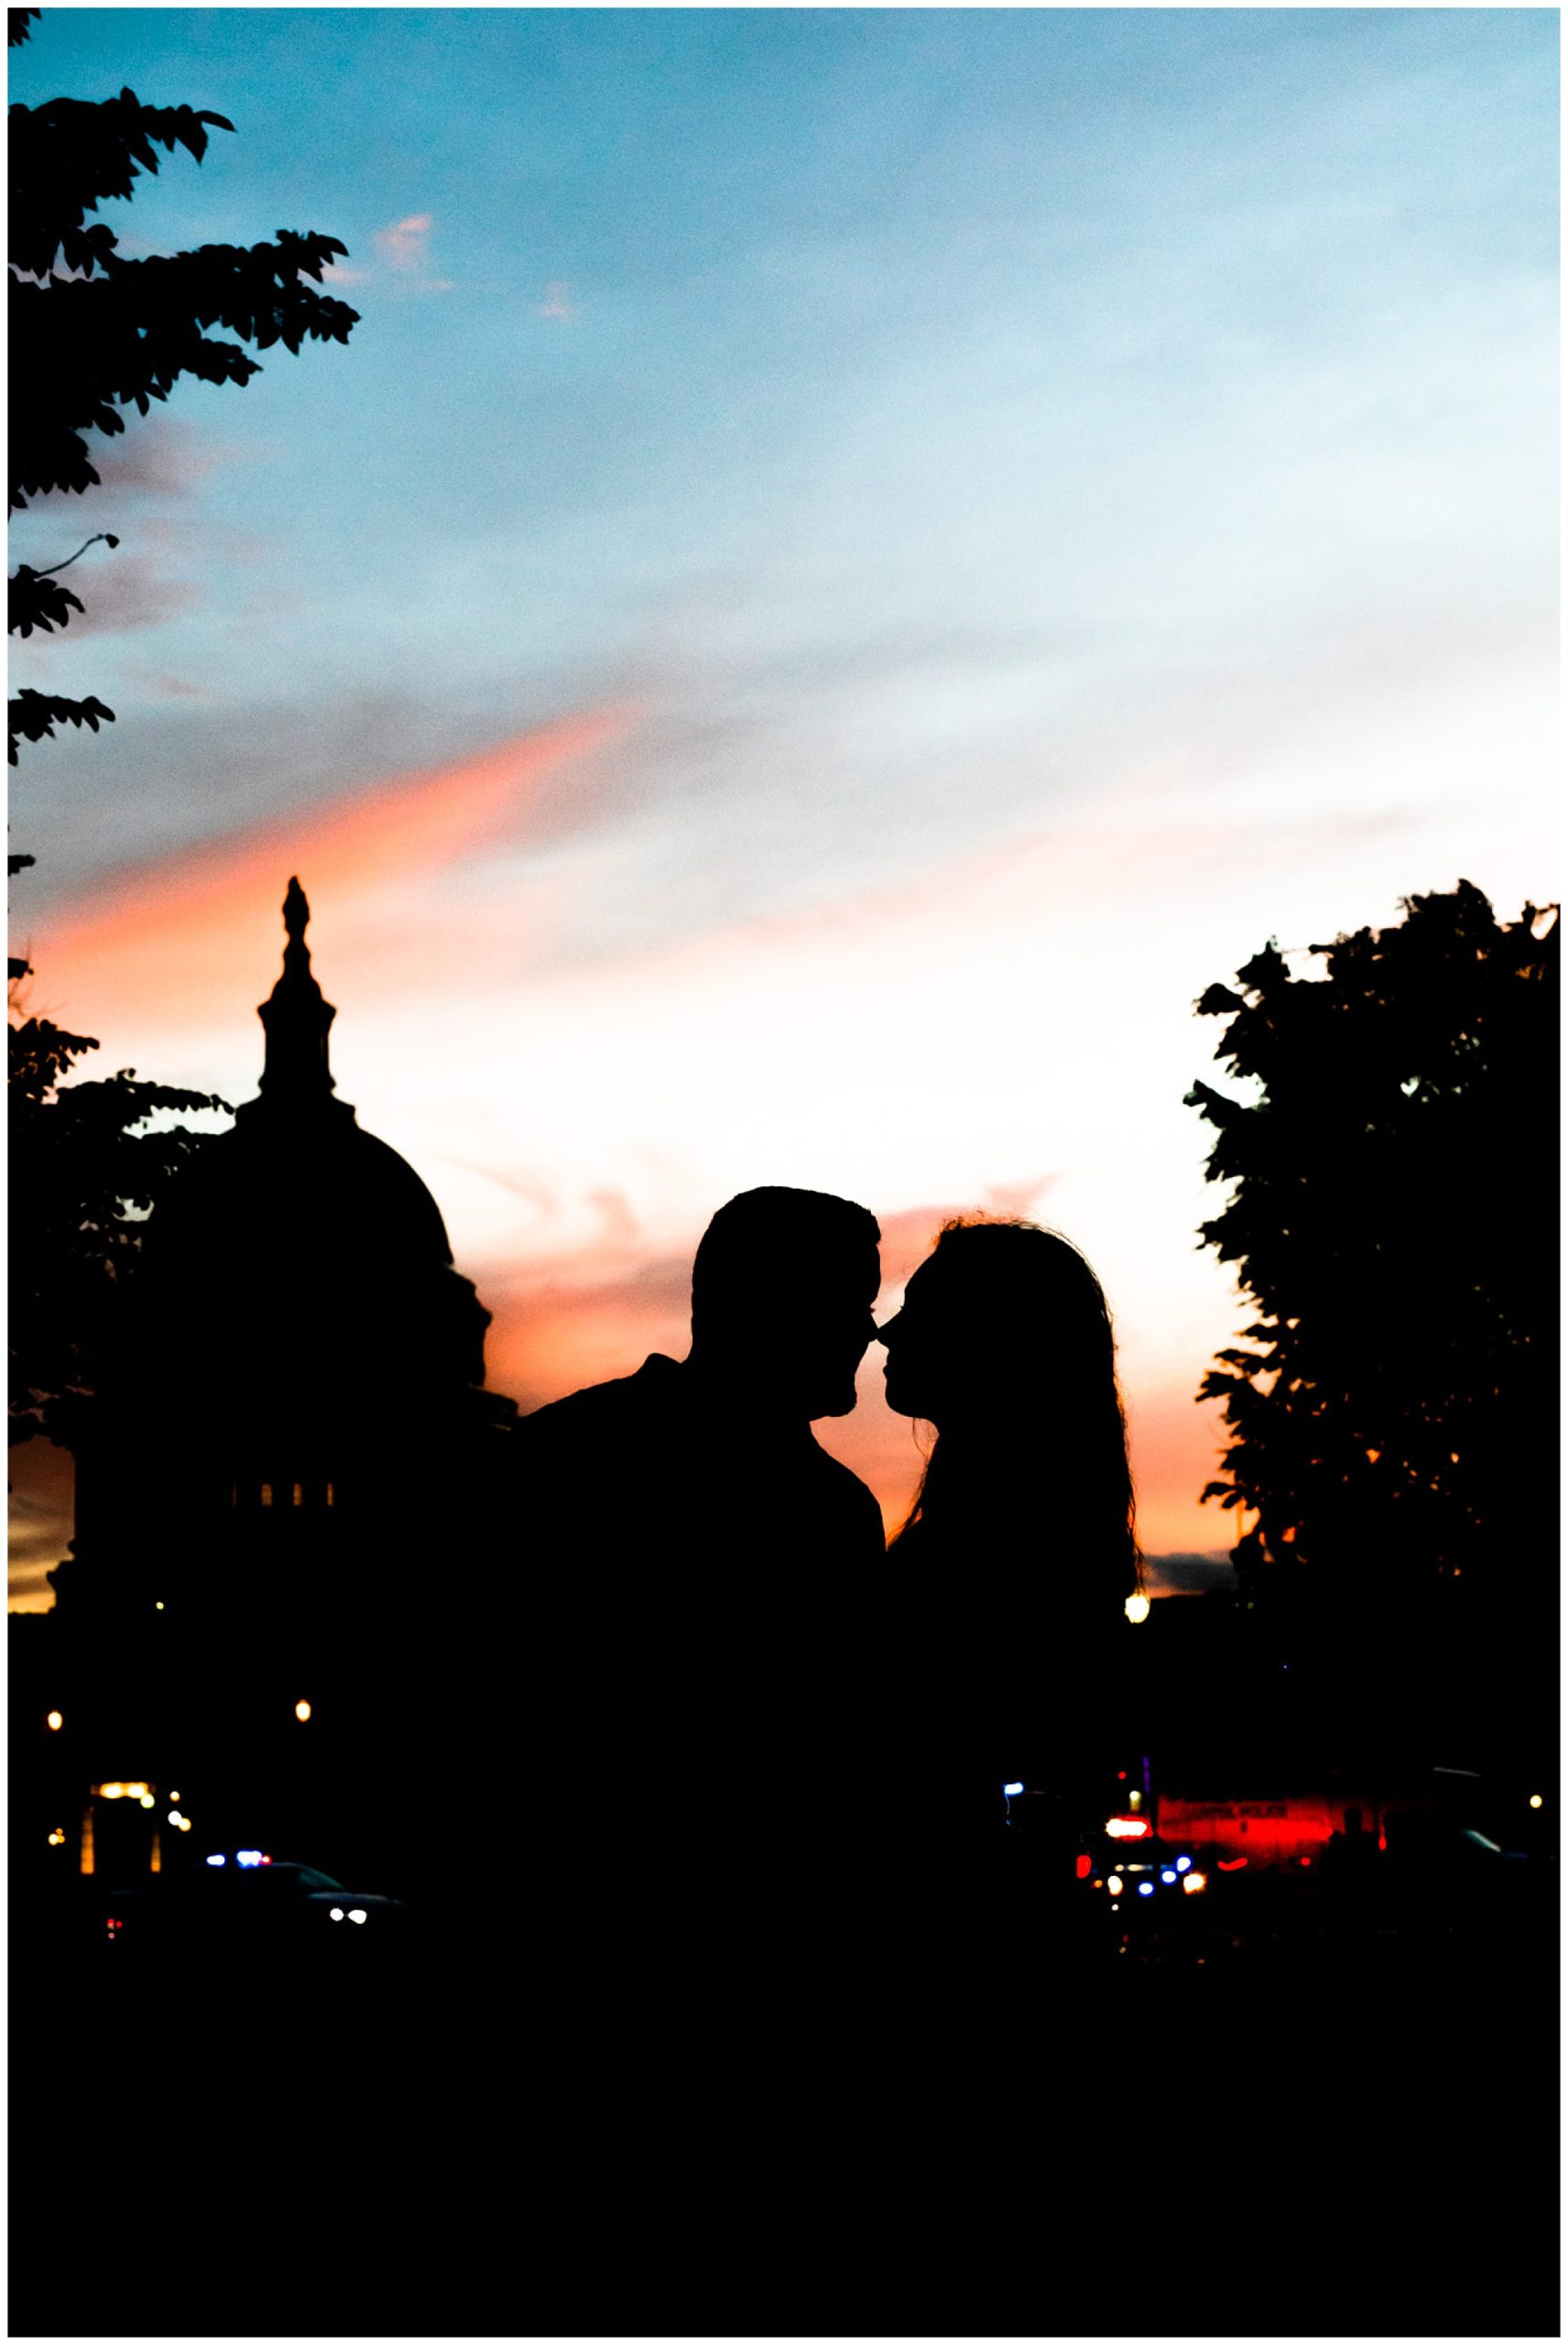 Capitol Hill engagement session, Capitol Hill portraits, D.C. engagement photography, D.C. engagement photographer, D.C. Capitol Hill D.C., DC photography, engagement photography, Rachel E.H. Photography, classic engagement photos, spring engagement photos, silhouette